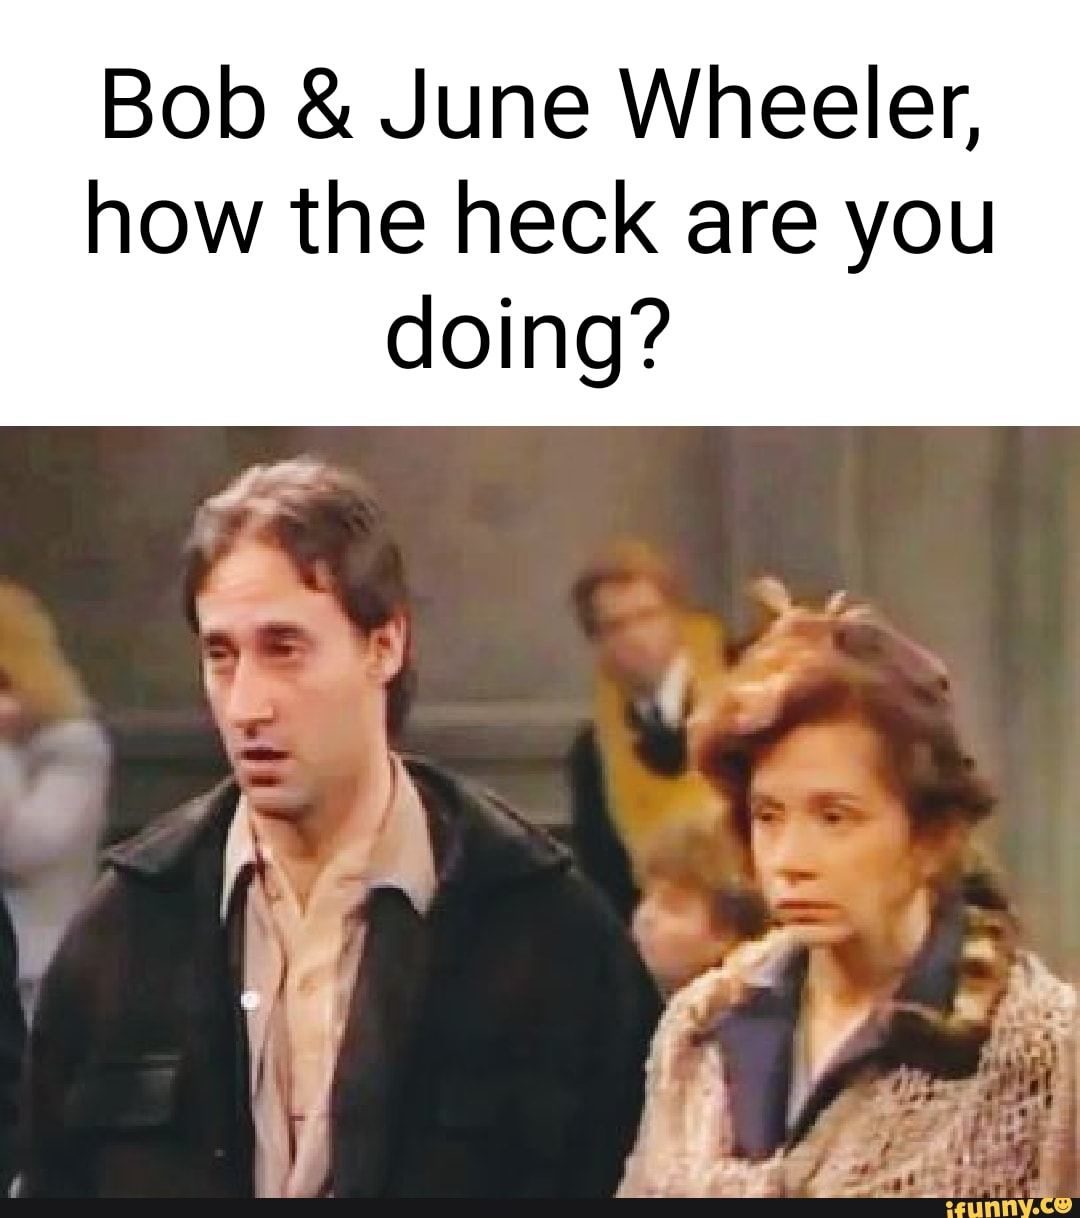 Bob June Wheeler how the heck are you doing? iFunny